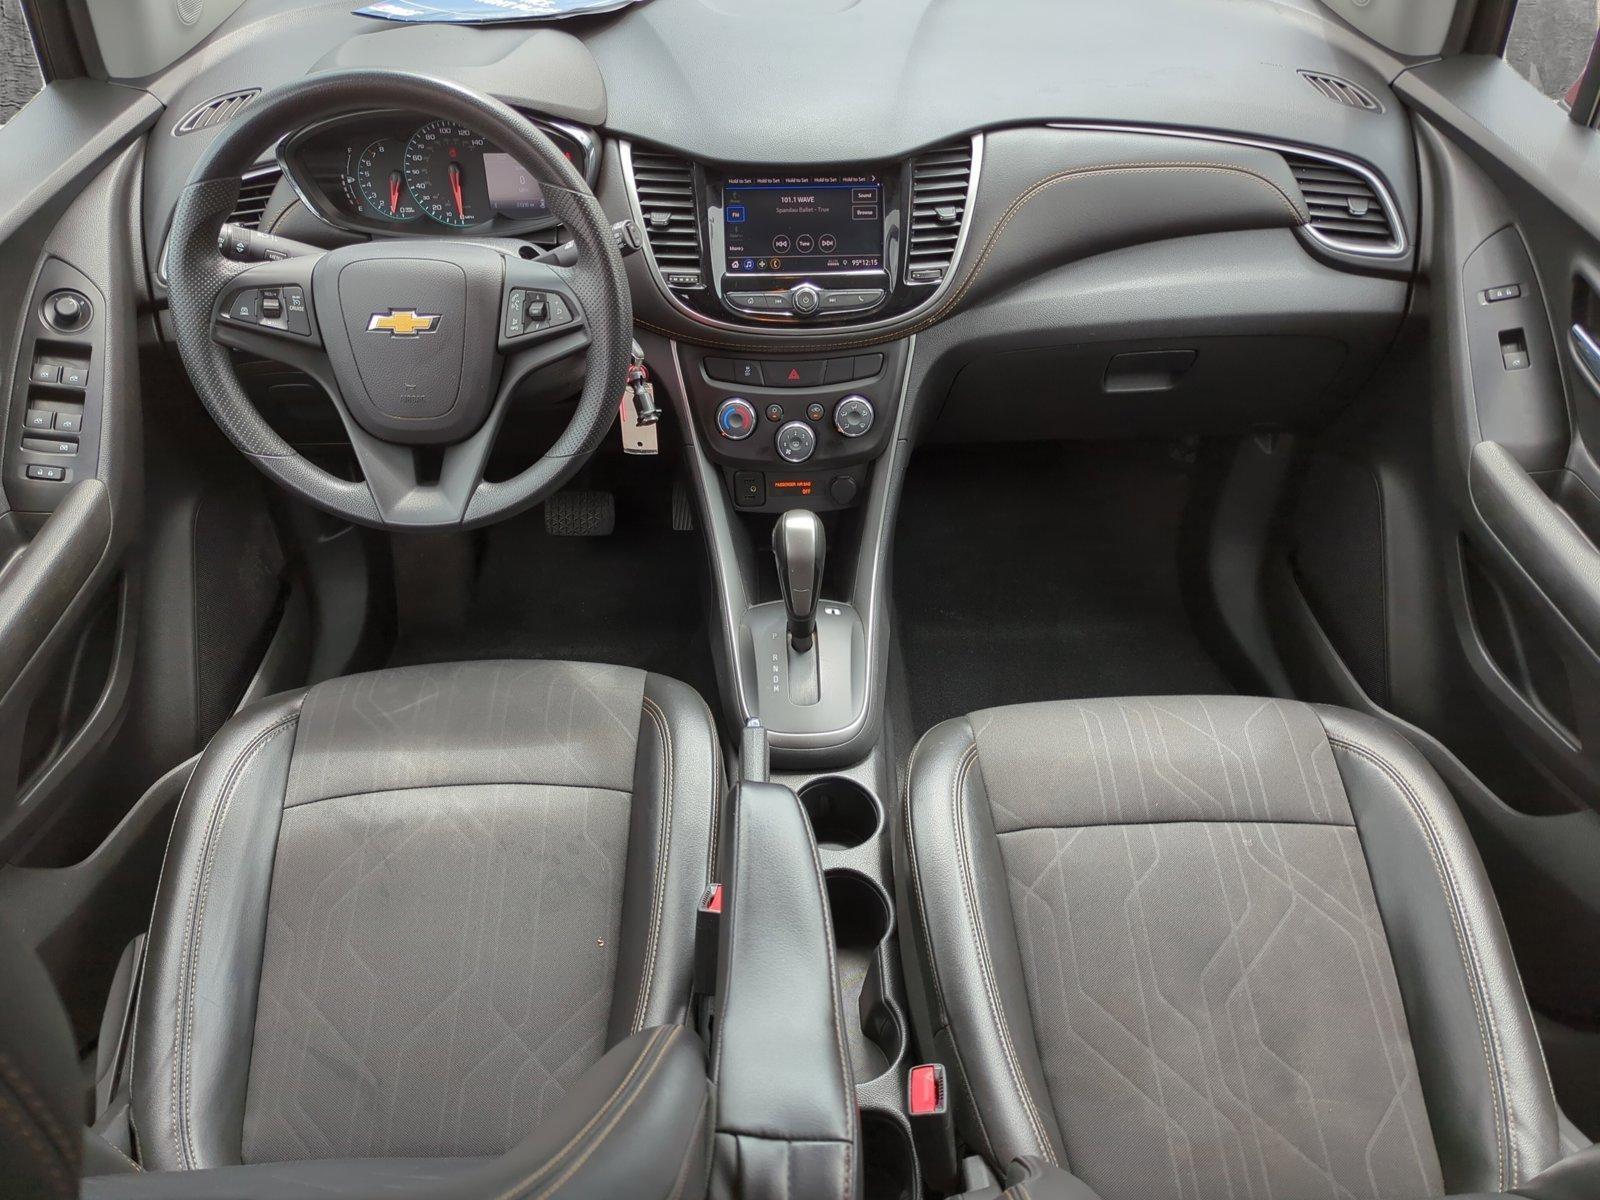 2021 Chevrolet Trax Vehicle Photo in Ft. Myers, FL 33907